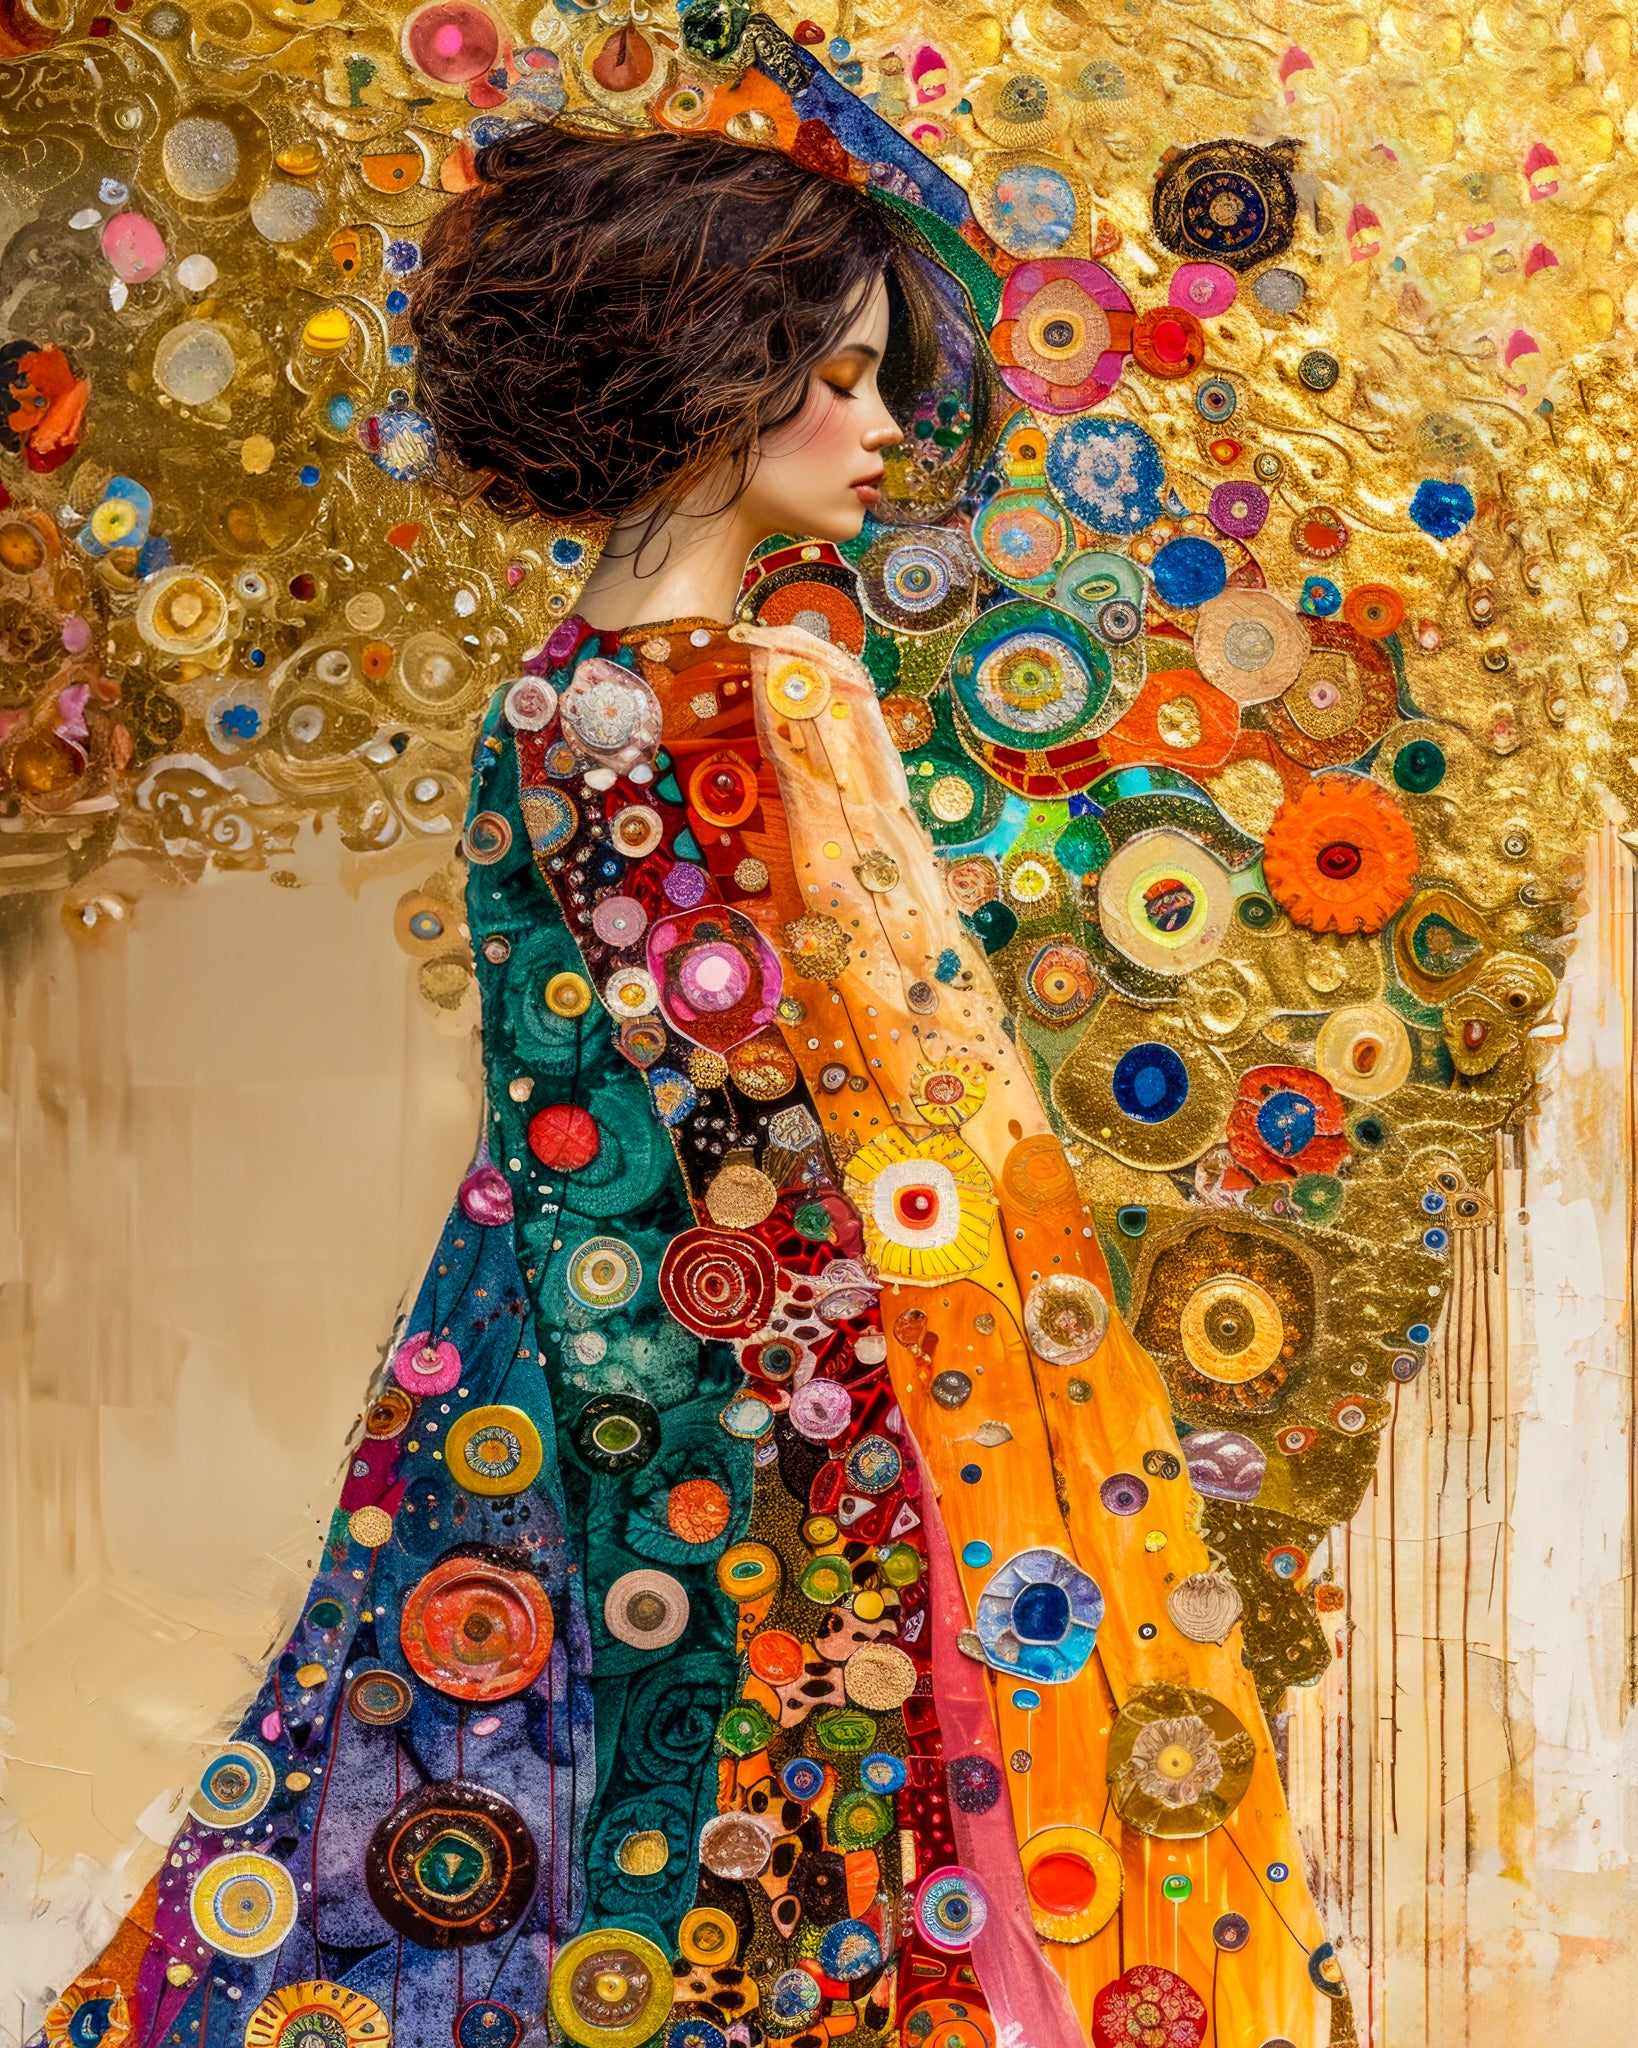 Fine art print of a woman in a colorful, circular-patterned cloak from the Heart Of Gold collection.